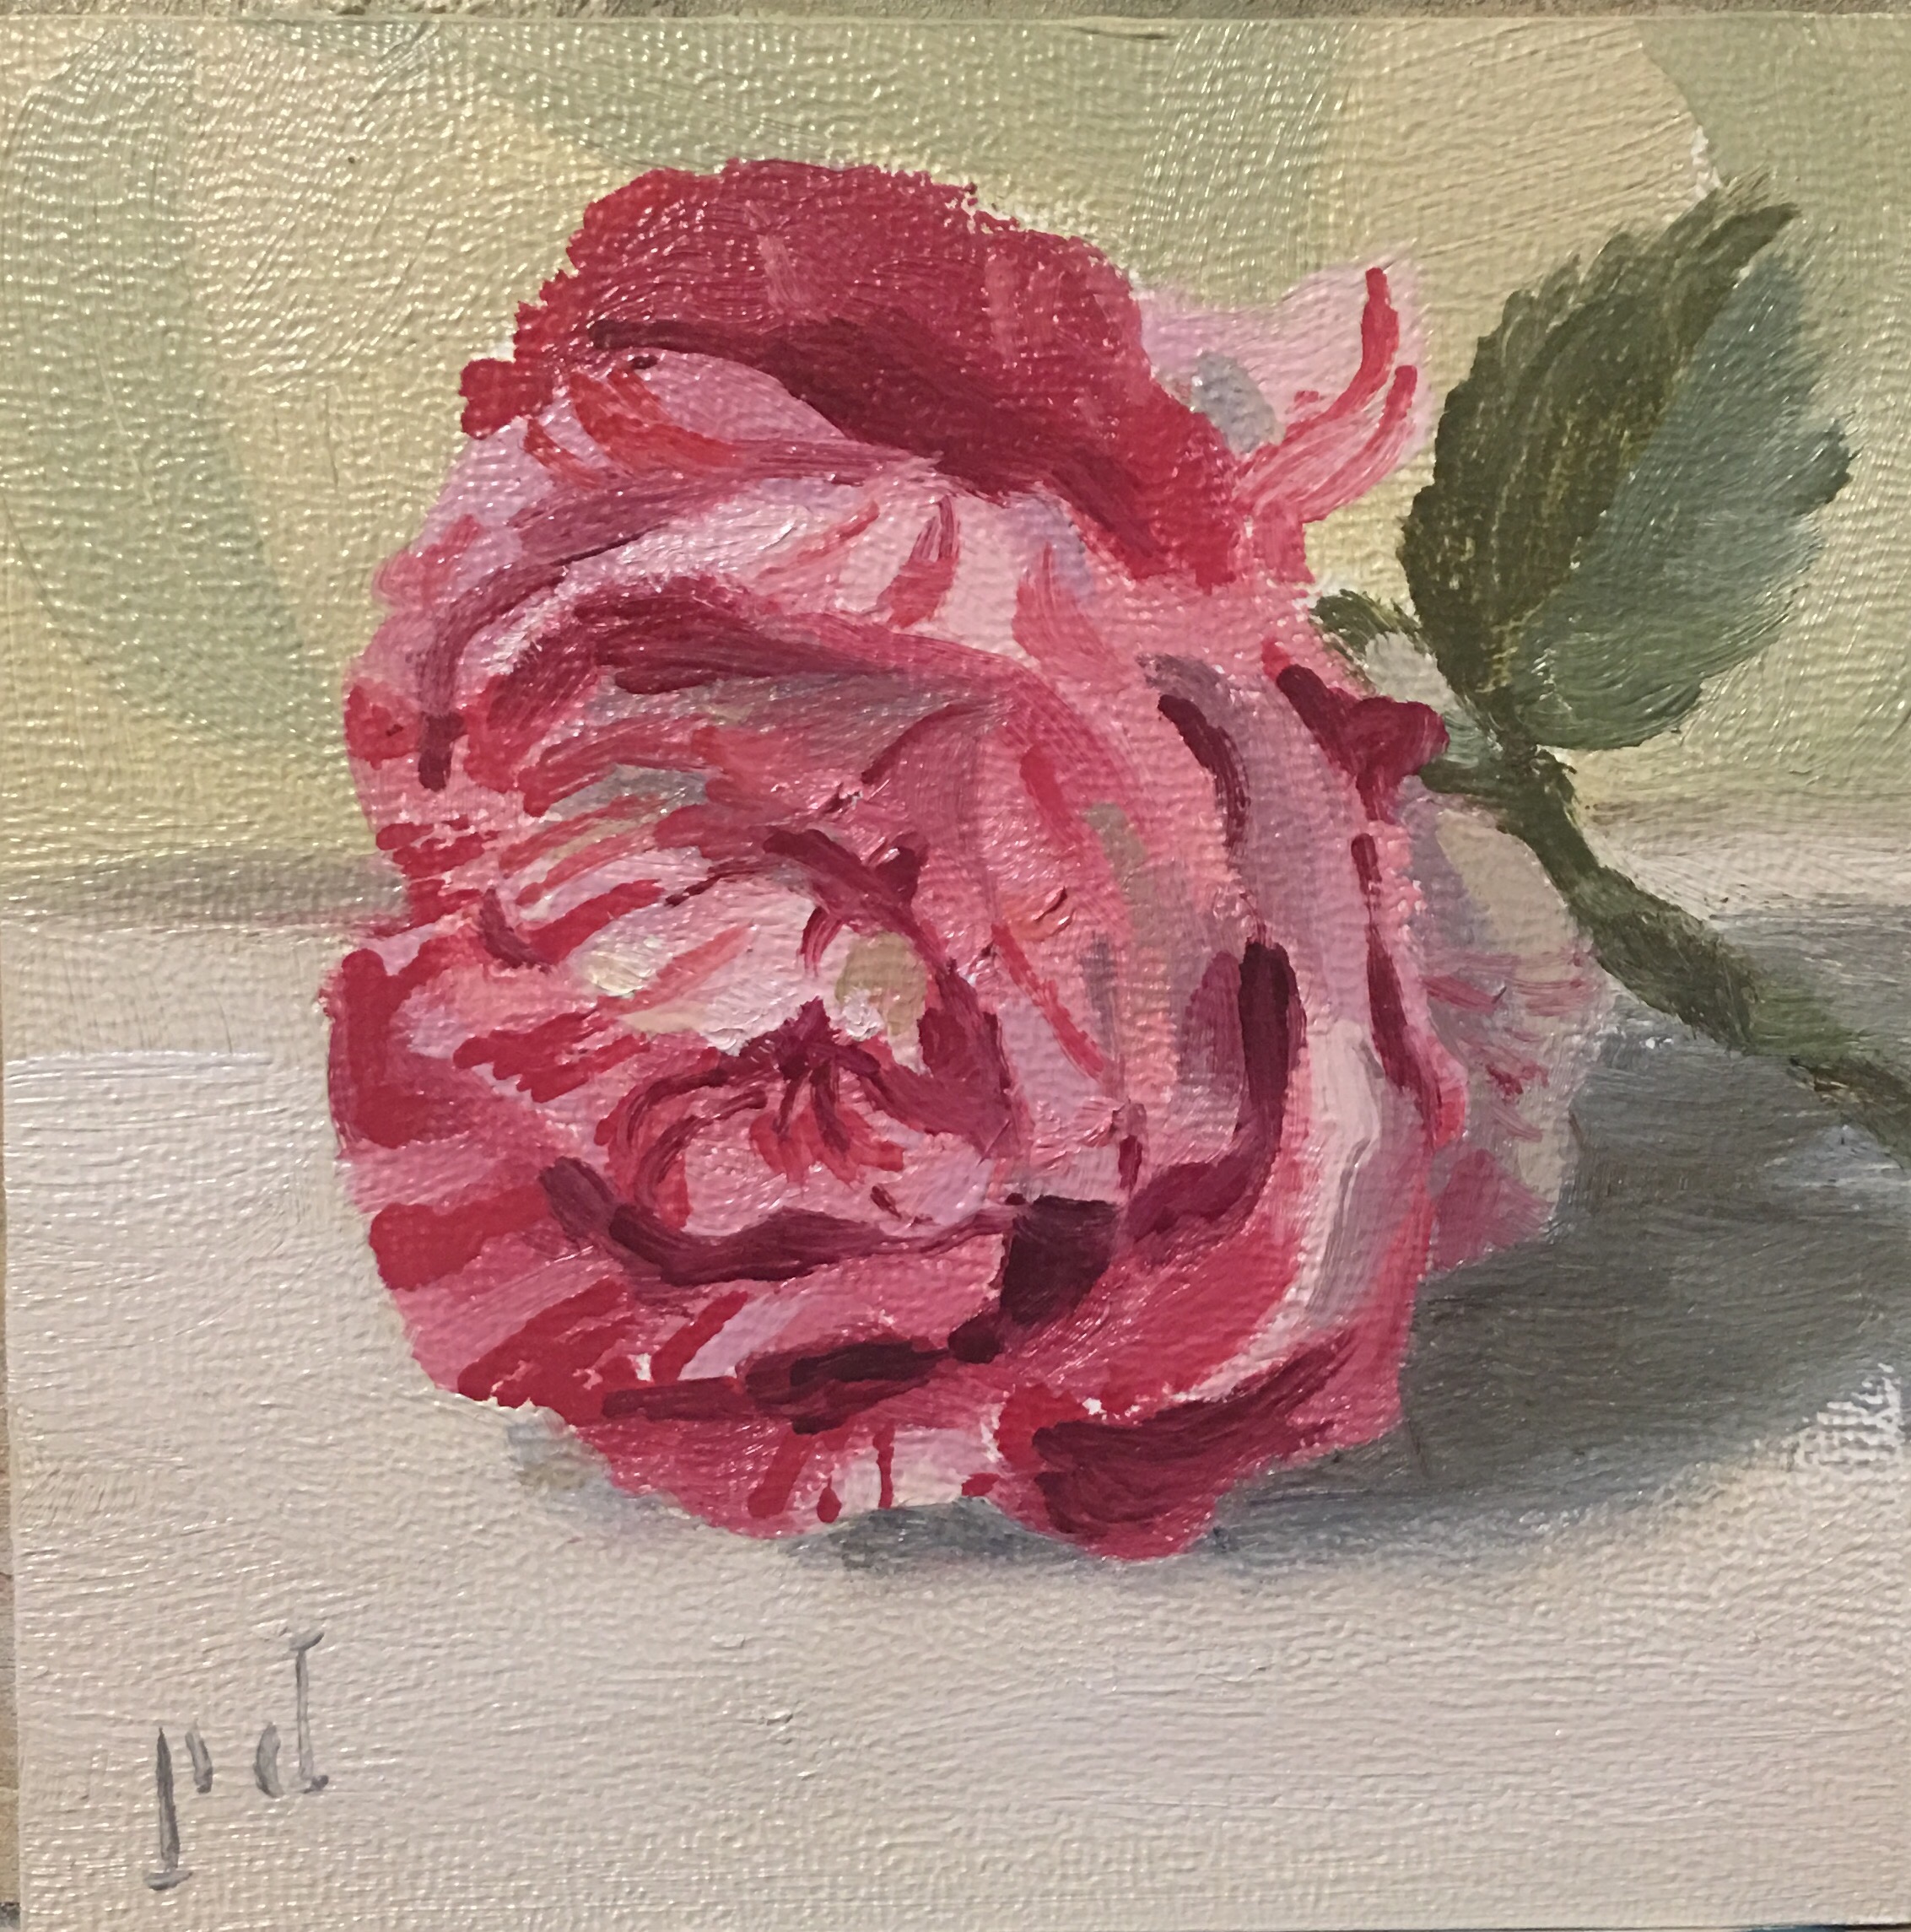 Candy Stripe Rose oil painting copyright 2017 Peter Dickison